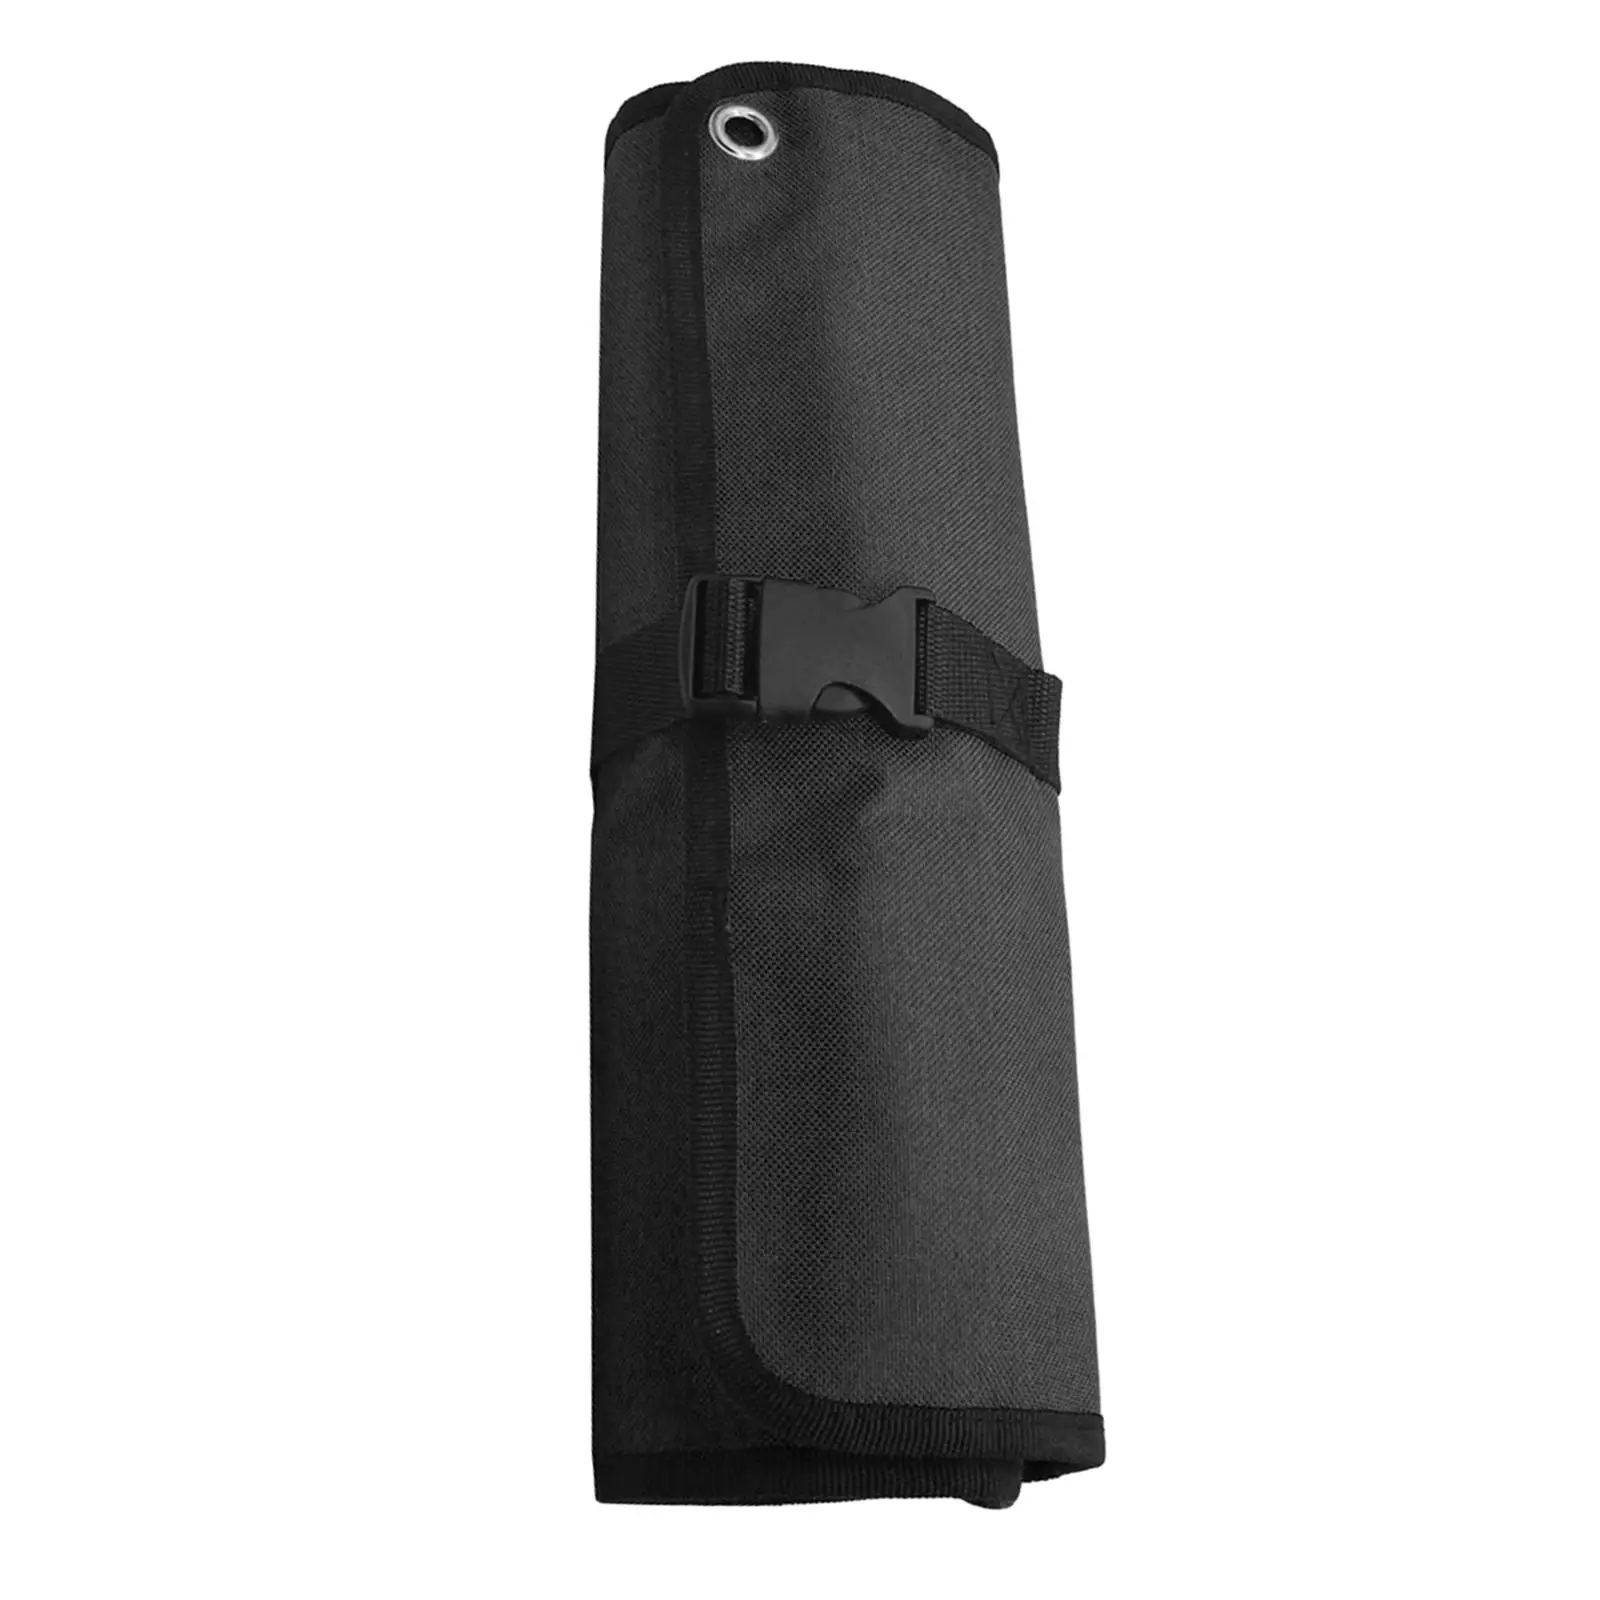 Rolling Tool Hanging Bag Storage Pouch Multifunction Portable Maintenance Tool Bag Holder for Painters Garden Technicians